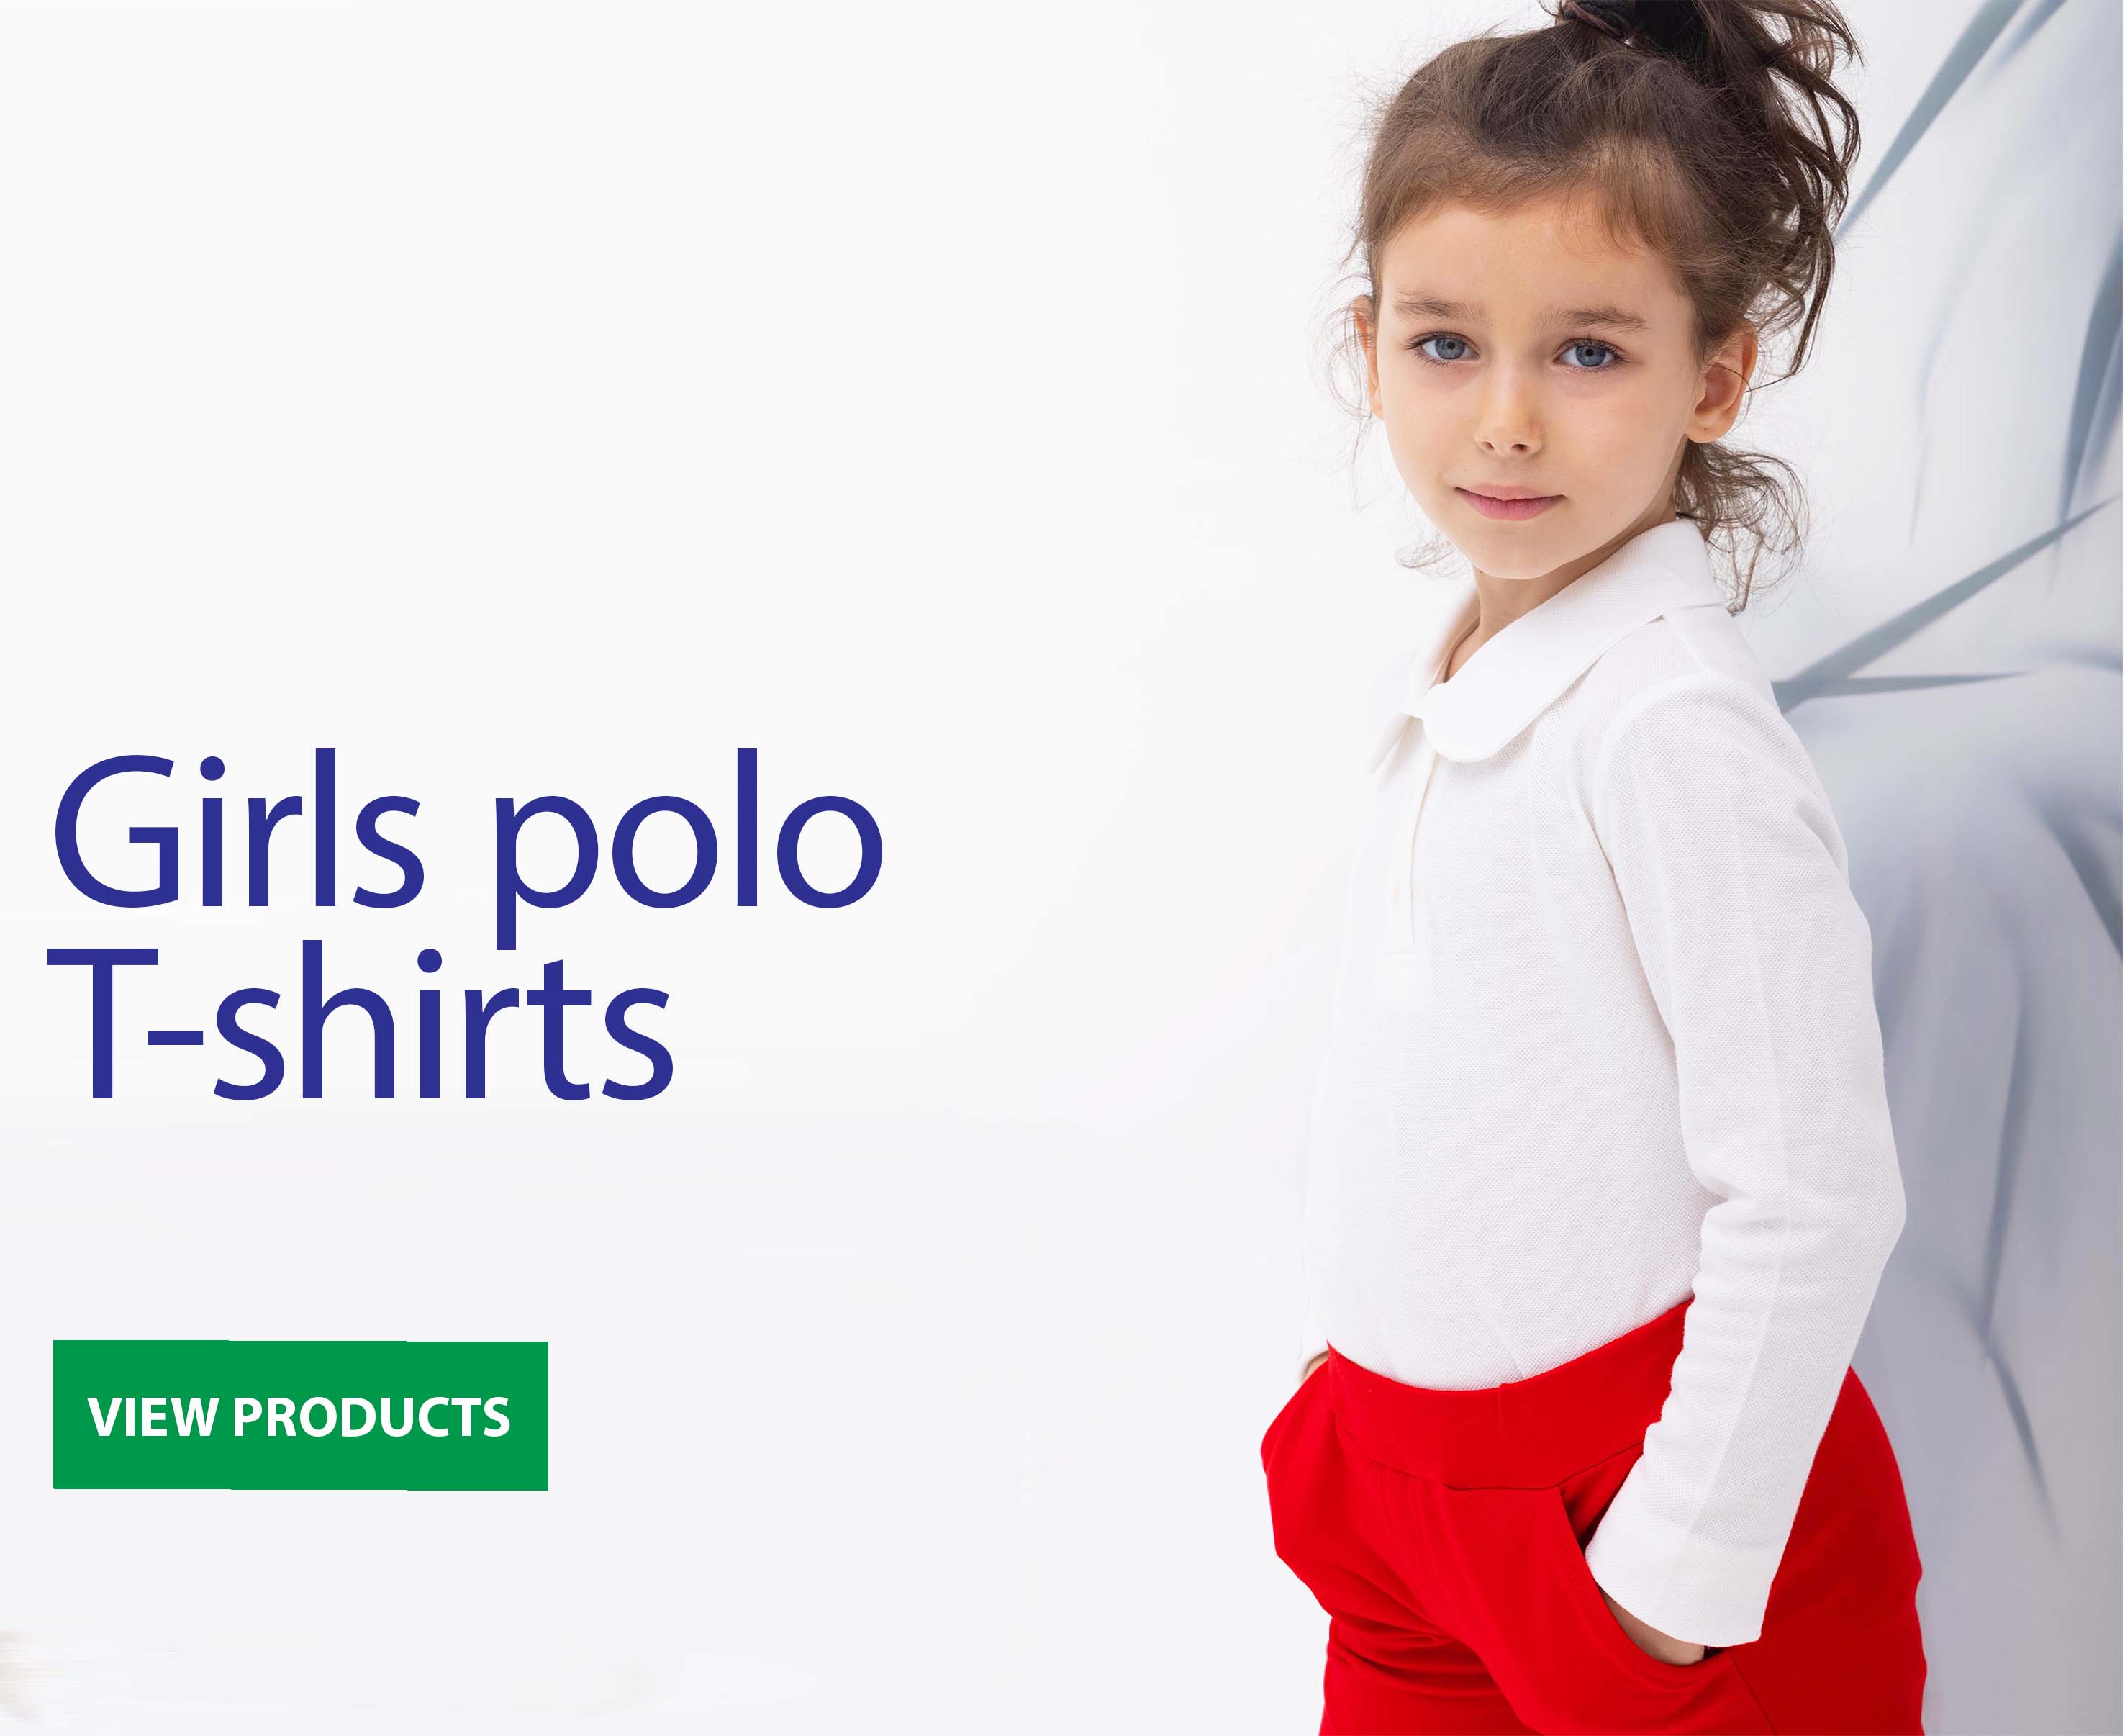 Polo T-shirts for girls